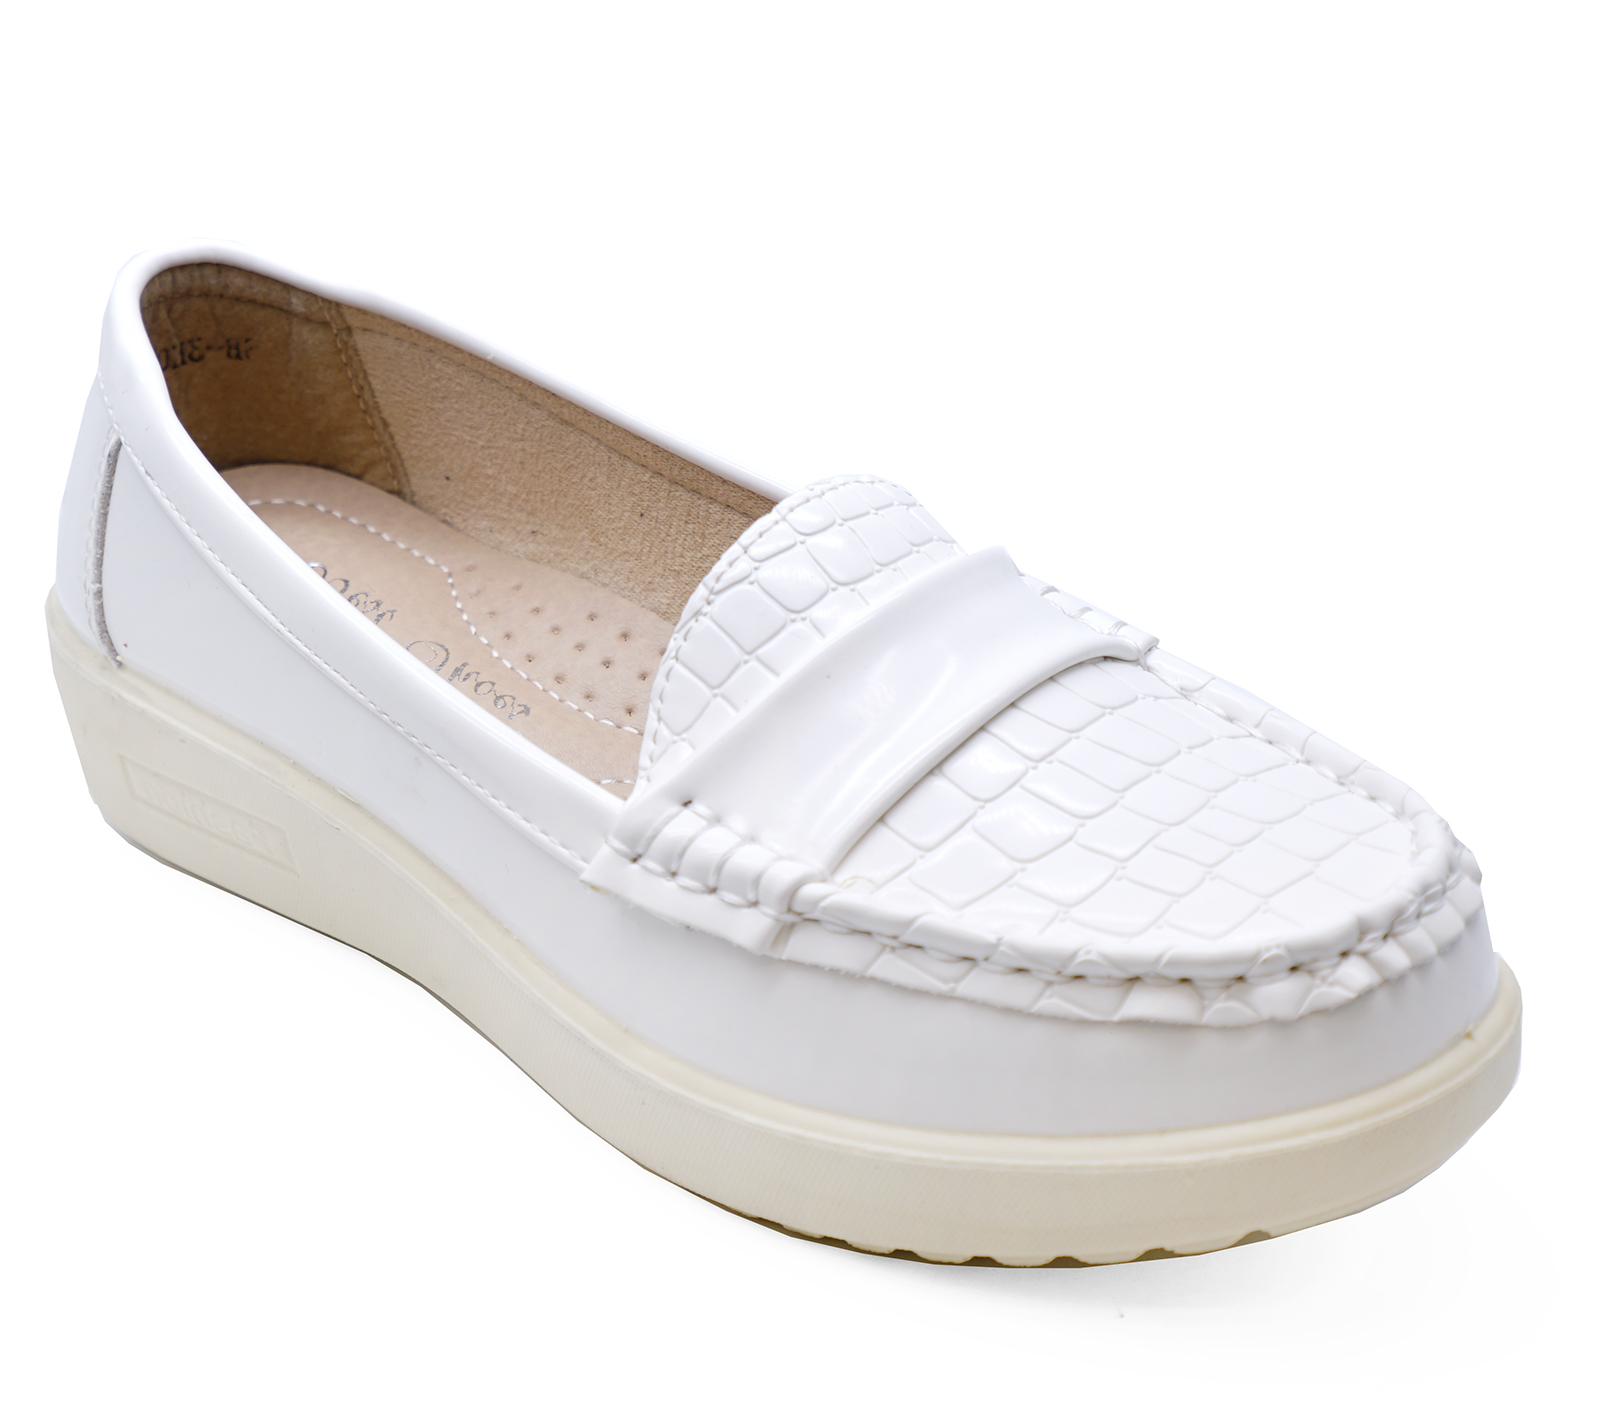 LADIES WHITE SLIP-ON LOAFERS MOCCASIN CASUAL SMART WORK COMFY DECK ...